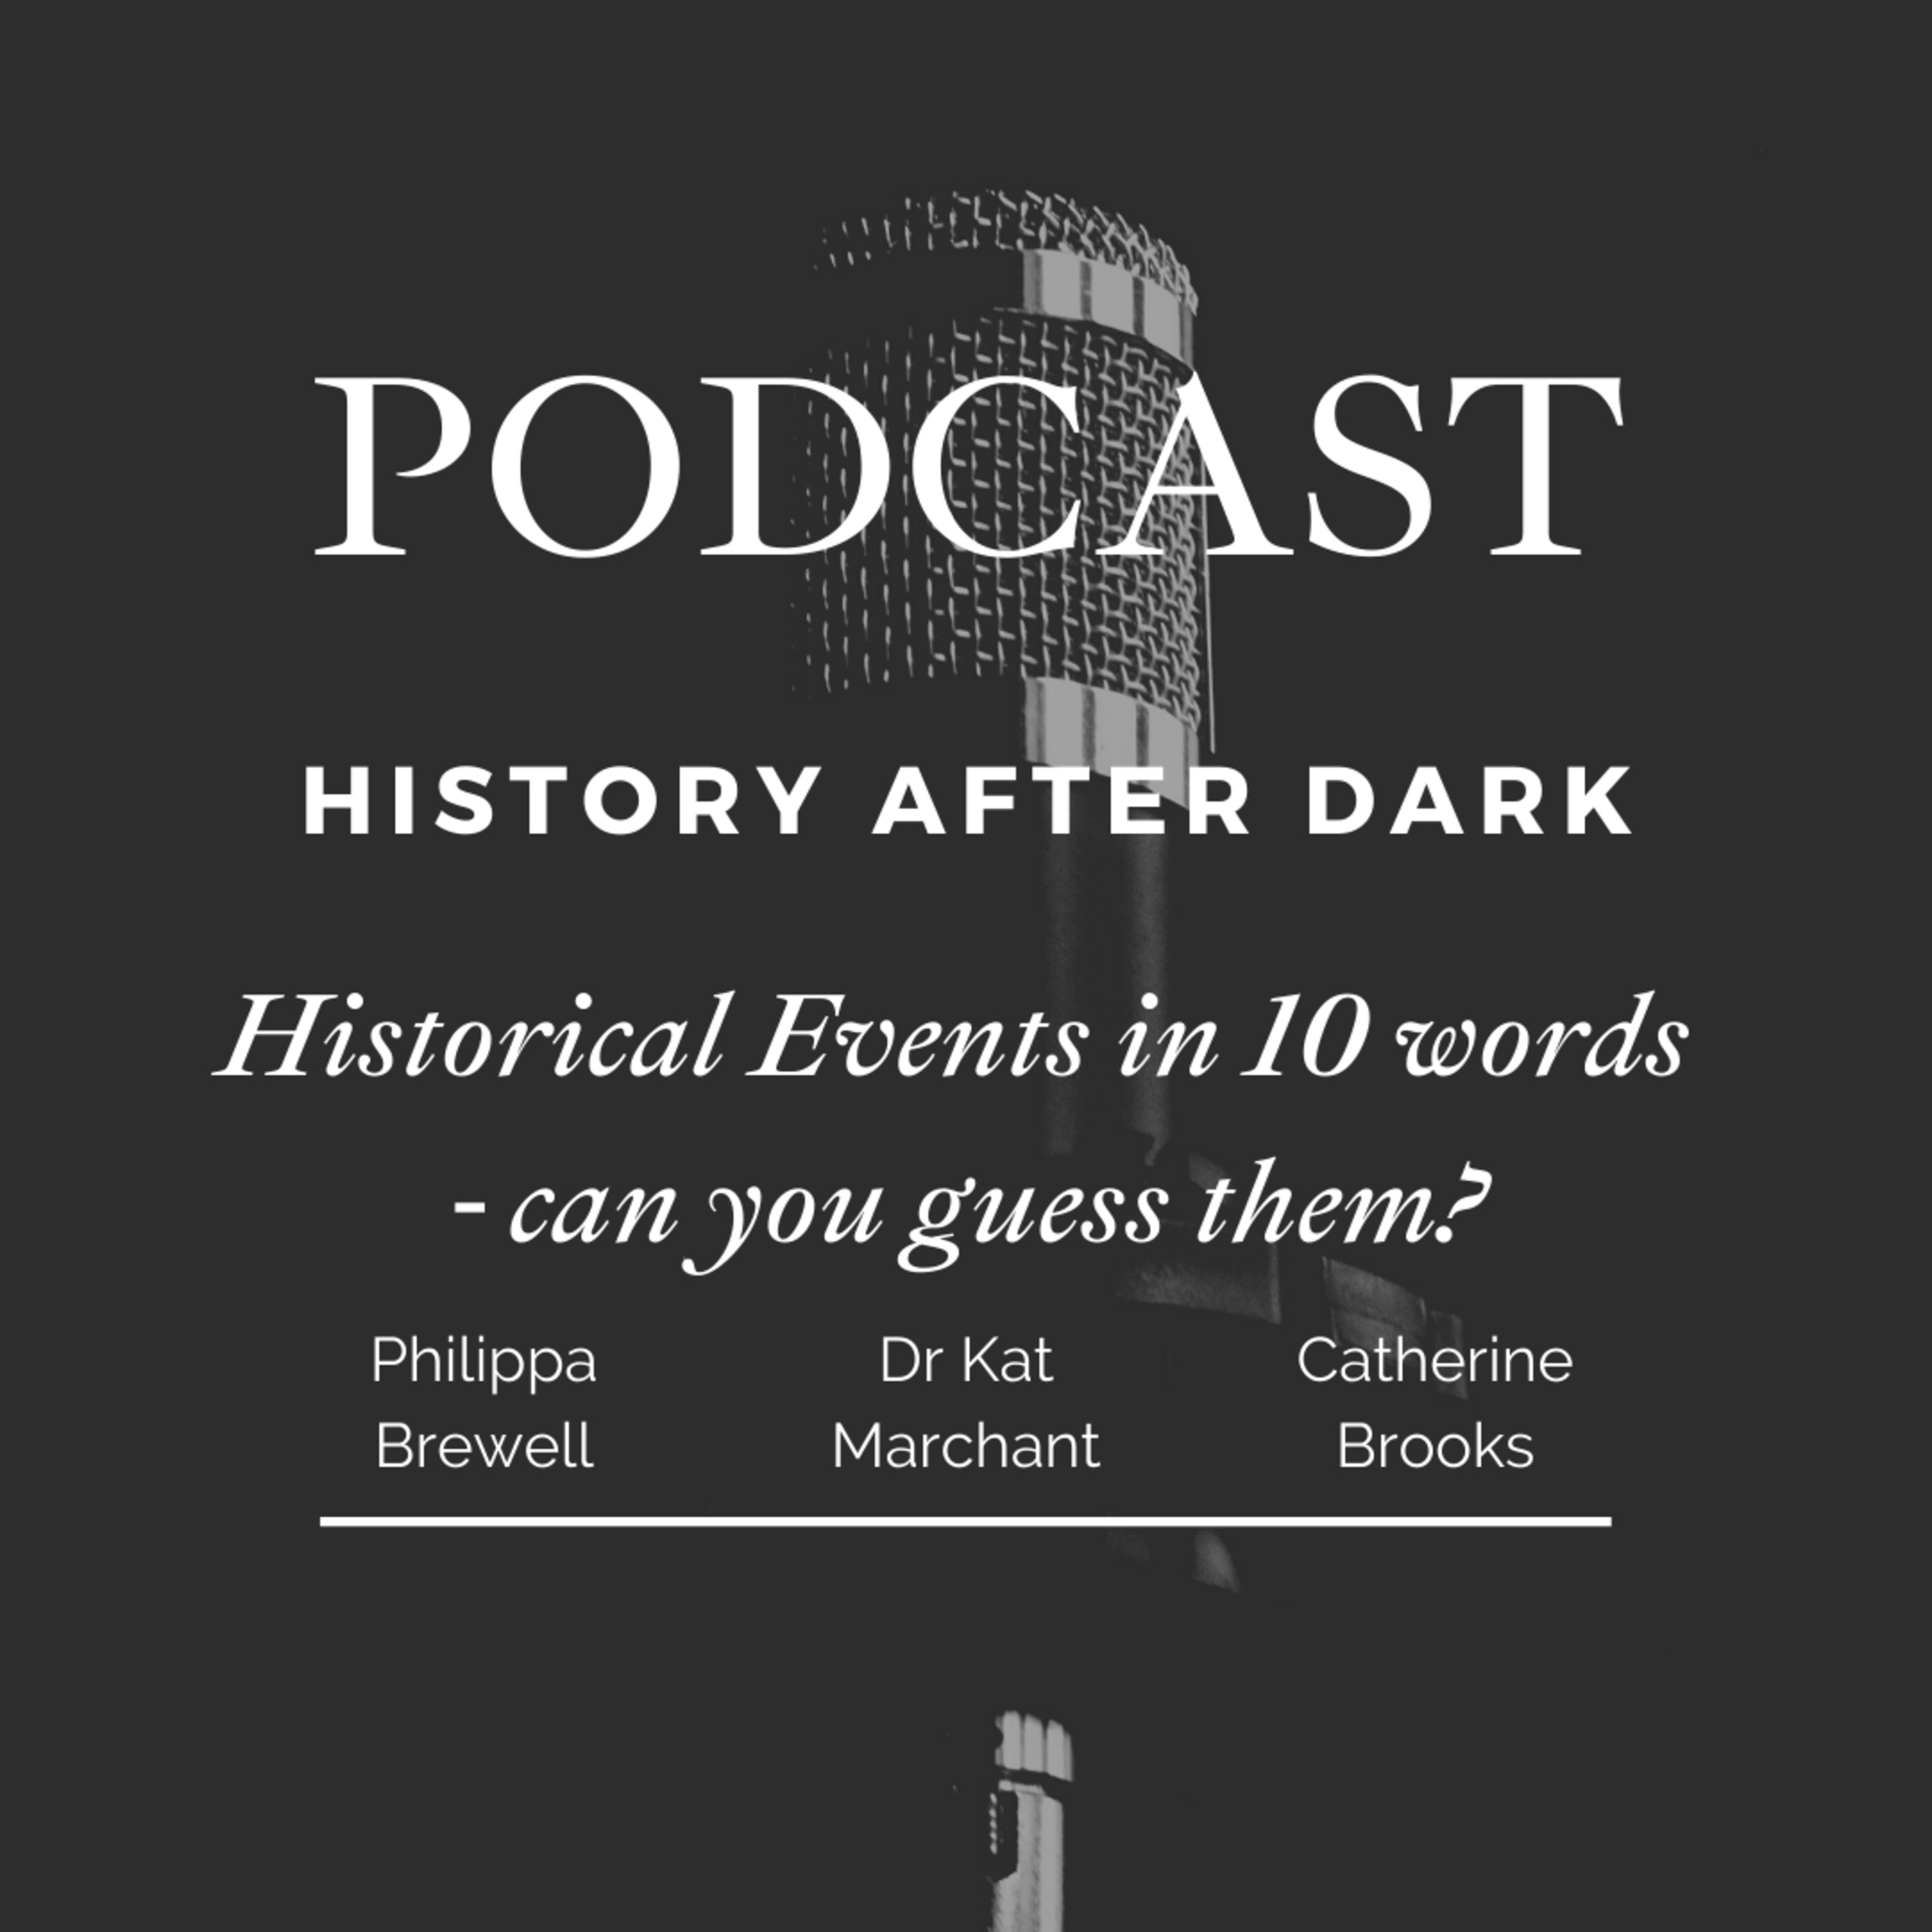 Historical Events in 10 words - can you guess them? | History After Dark